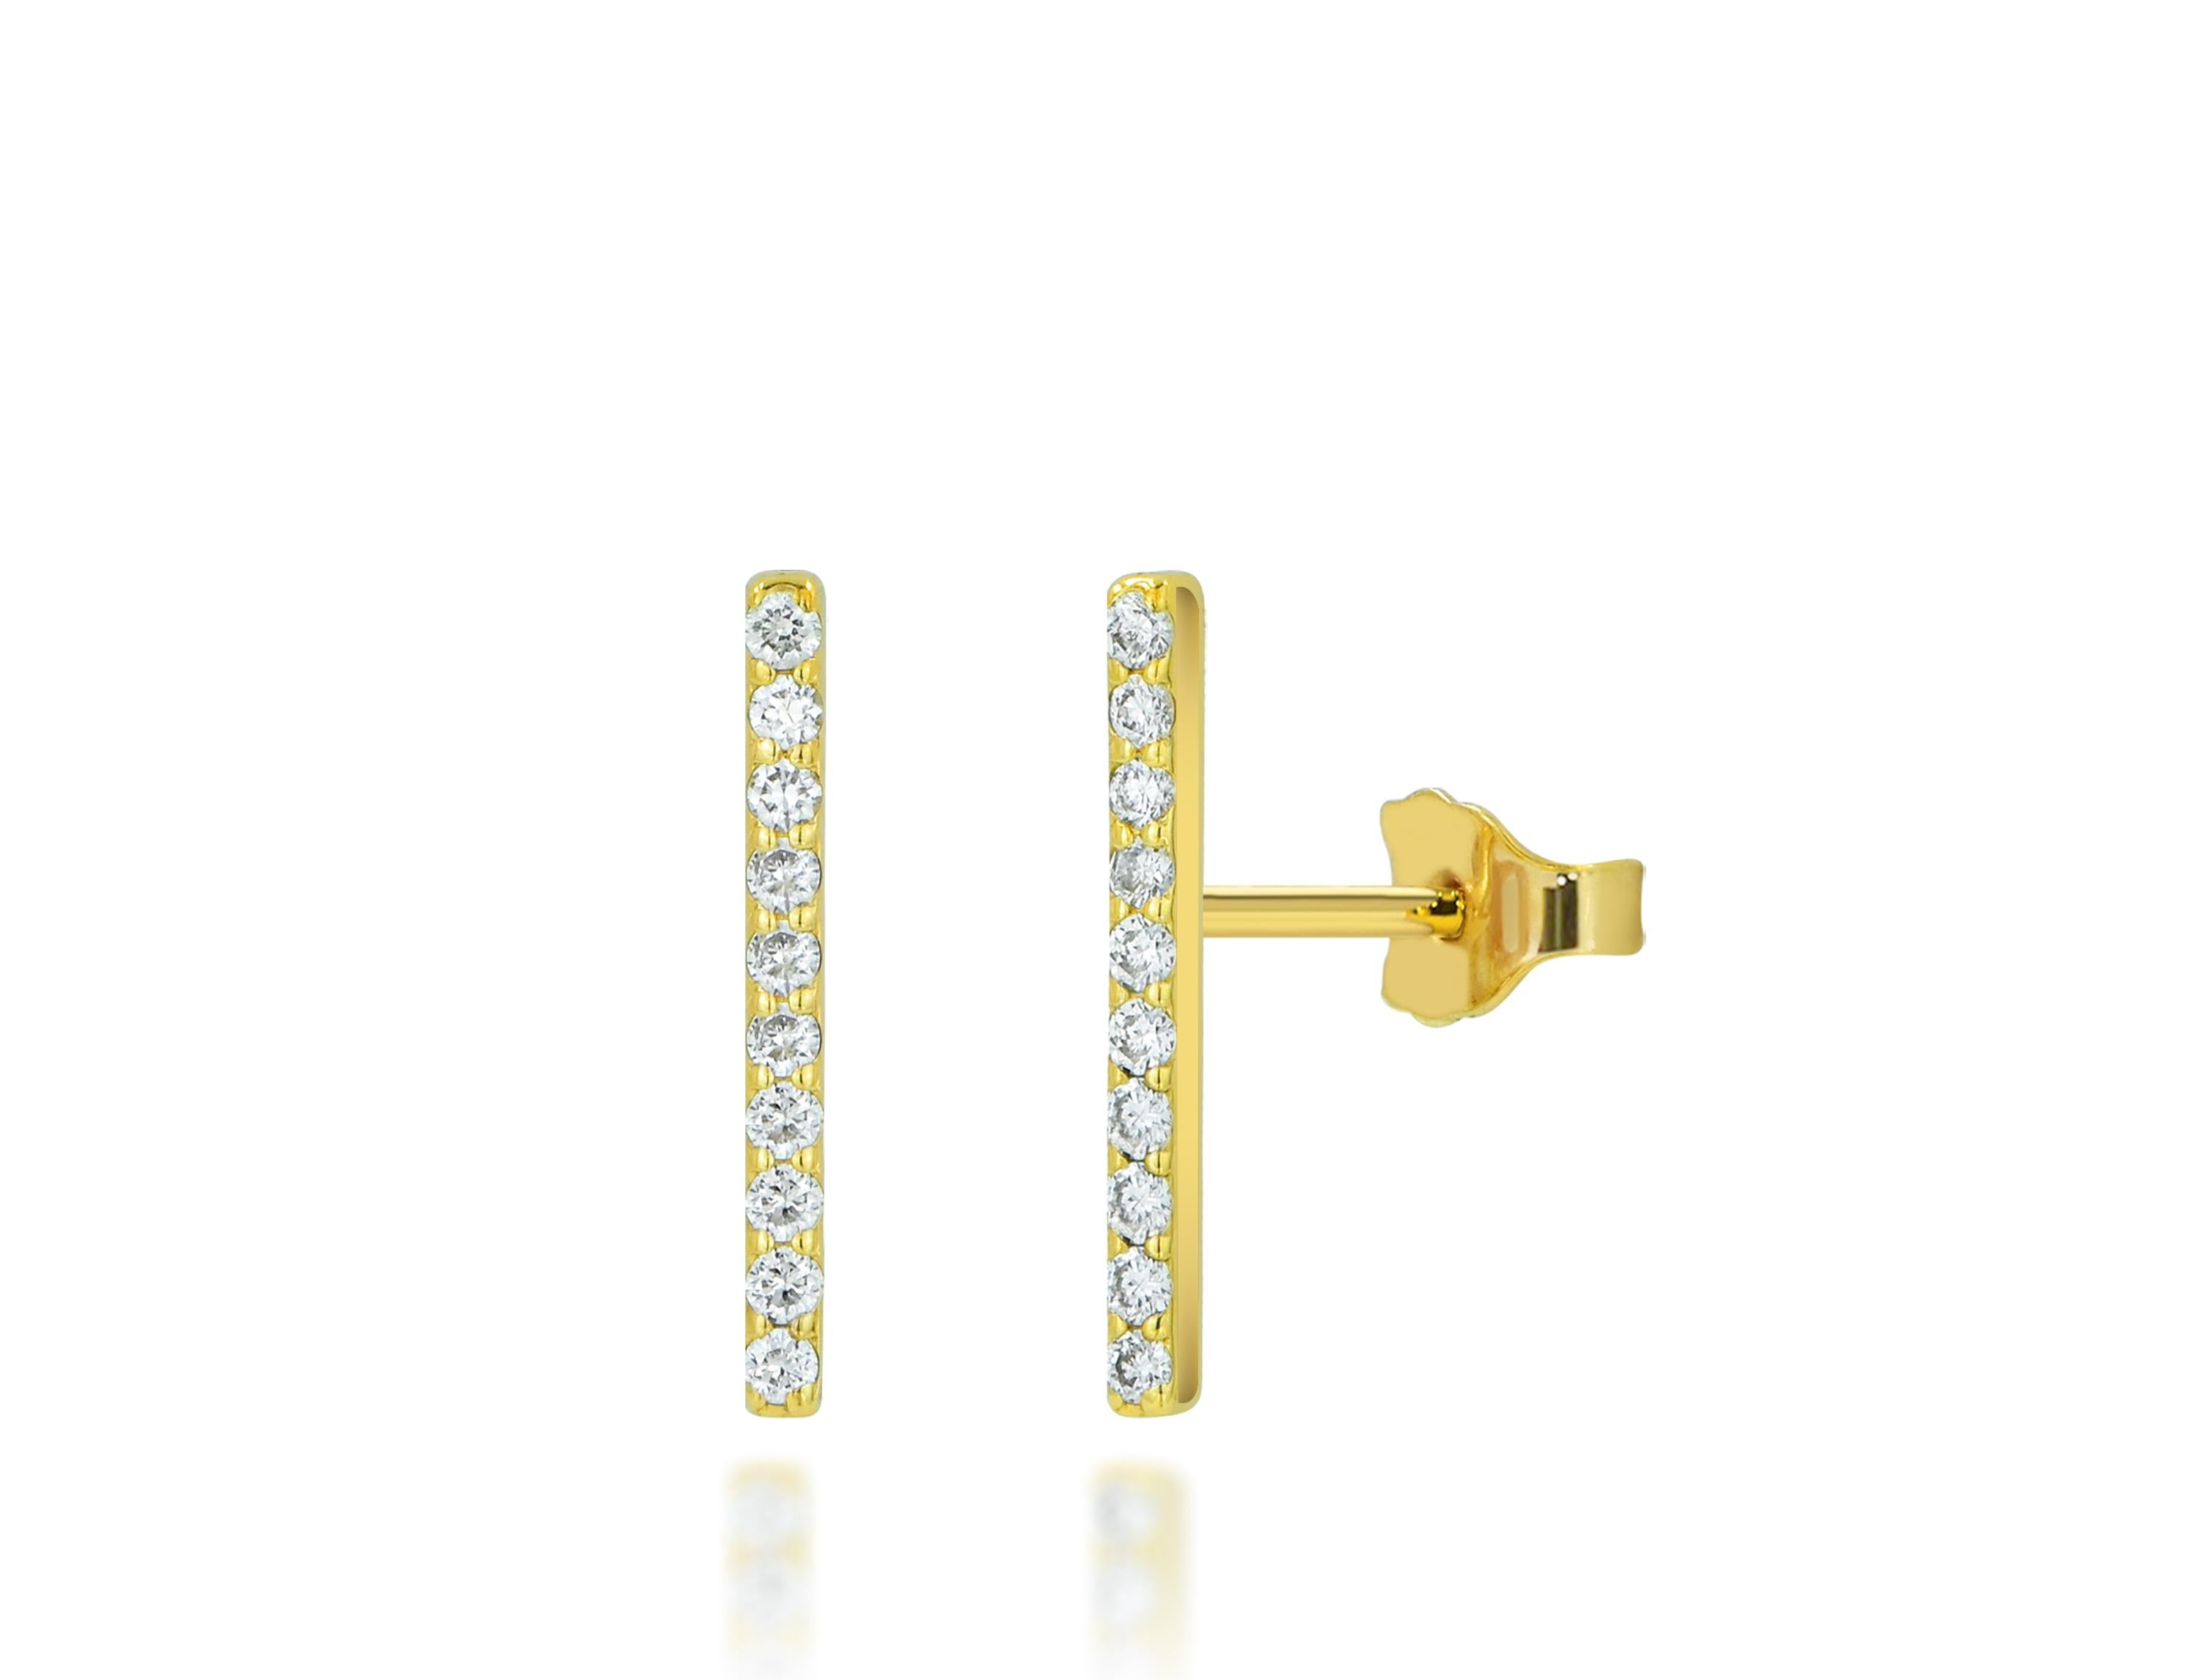 Diamond Bar Earrings in 18K Solid Gold Dainty Bar Earring 12 mm Long Minimalist Bar Earrings Mothers Day Gift

These Dainty Bar Stud Earrings are made of solid 18K gold featuring shiny brilliant cut natural diamonds set by master setter in our